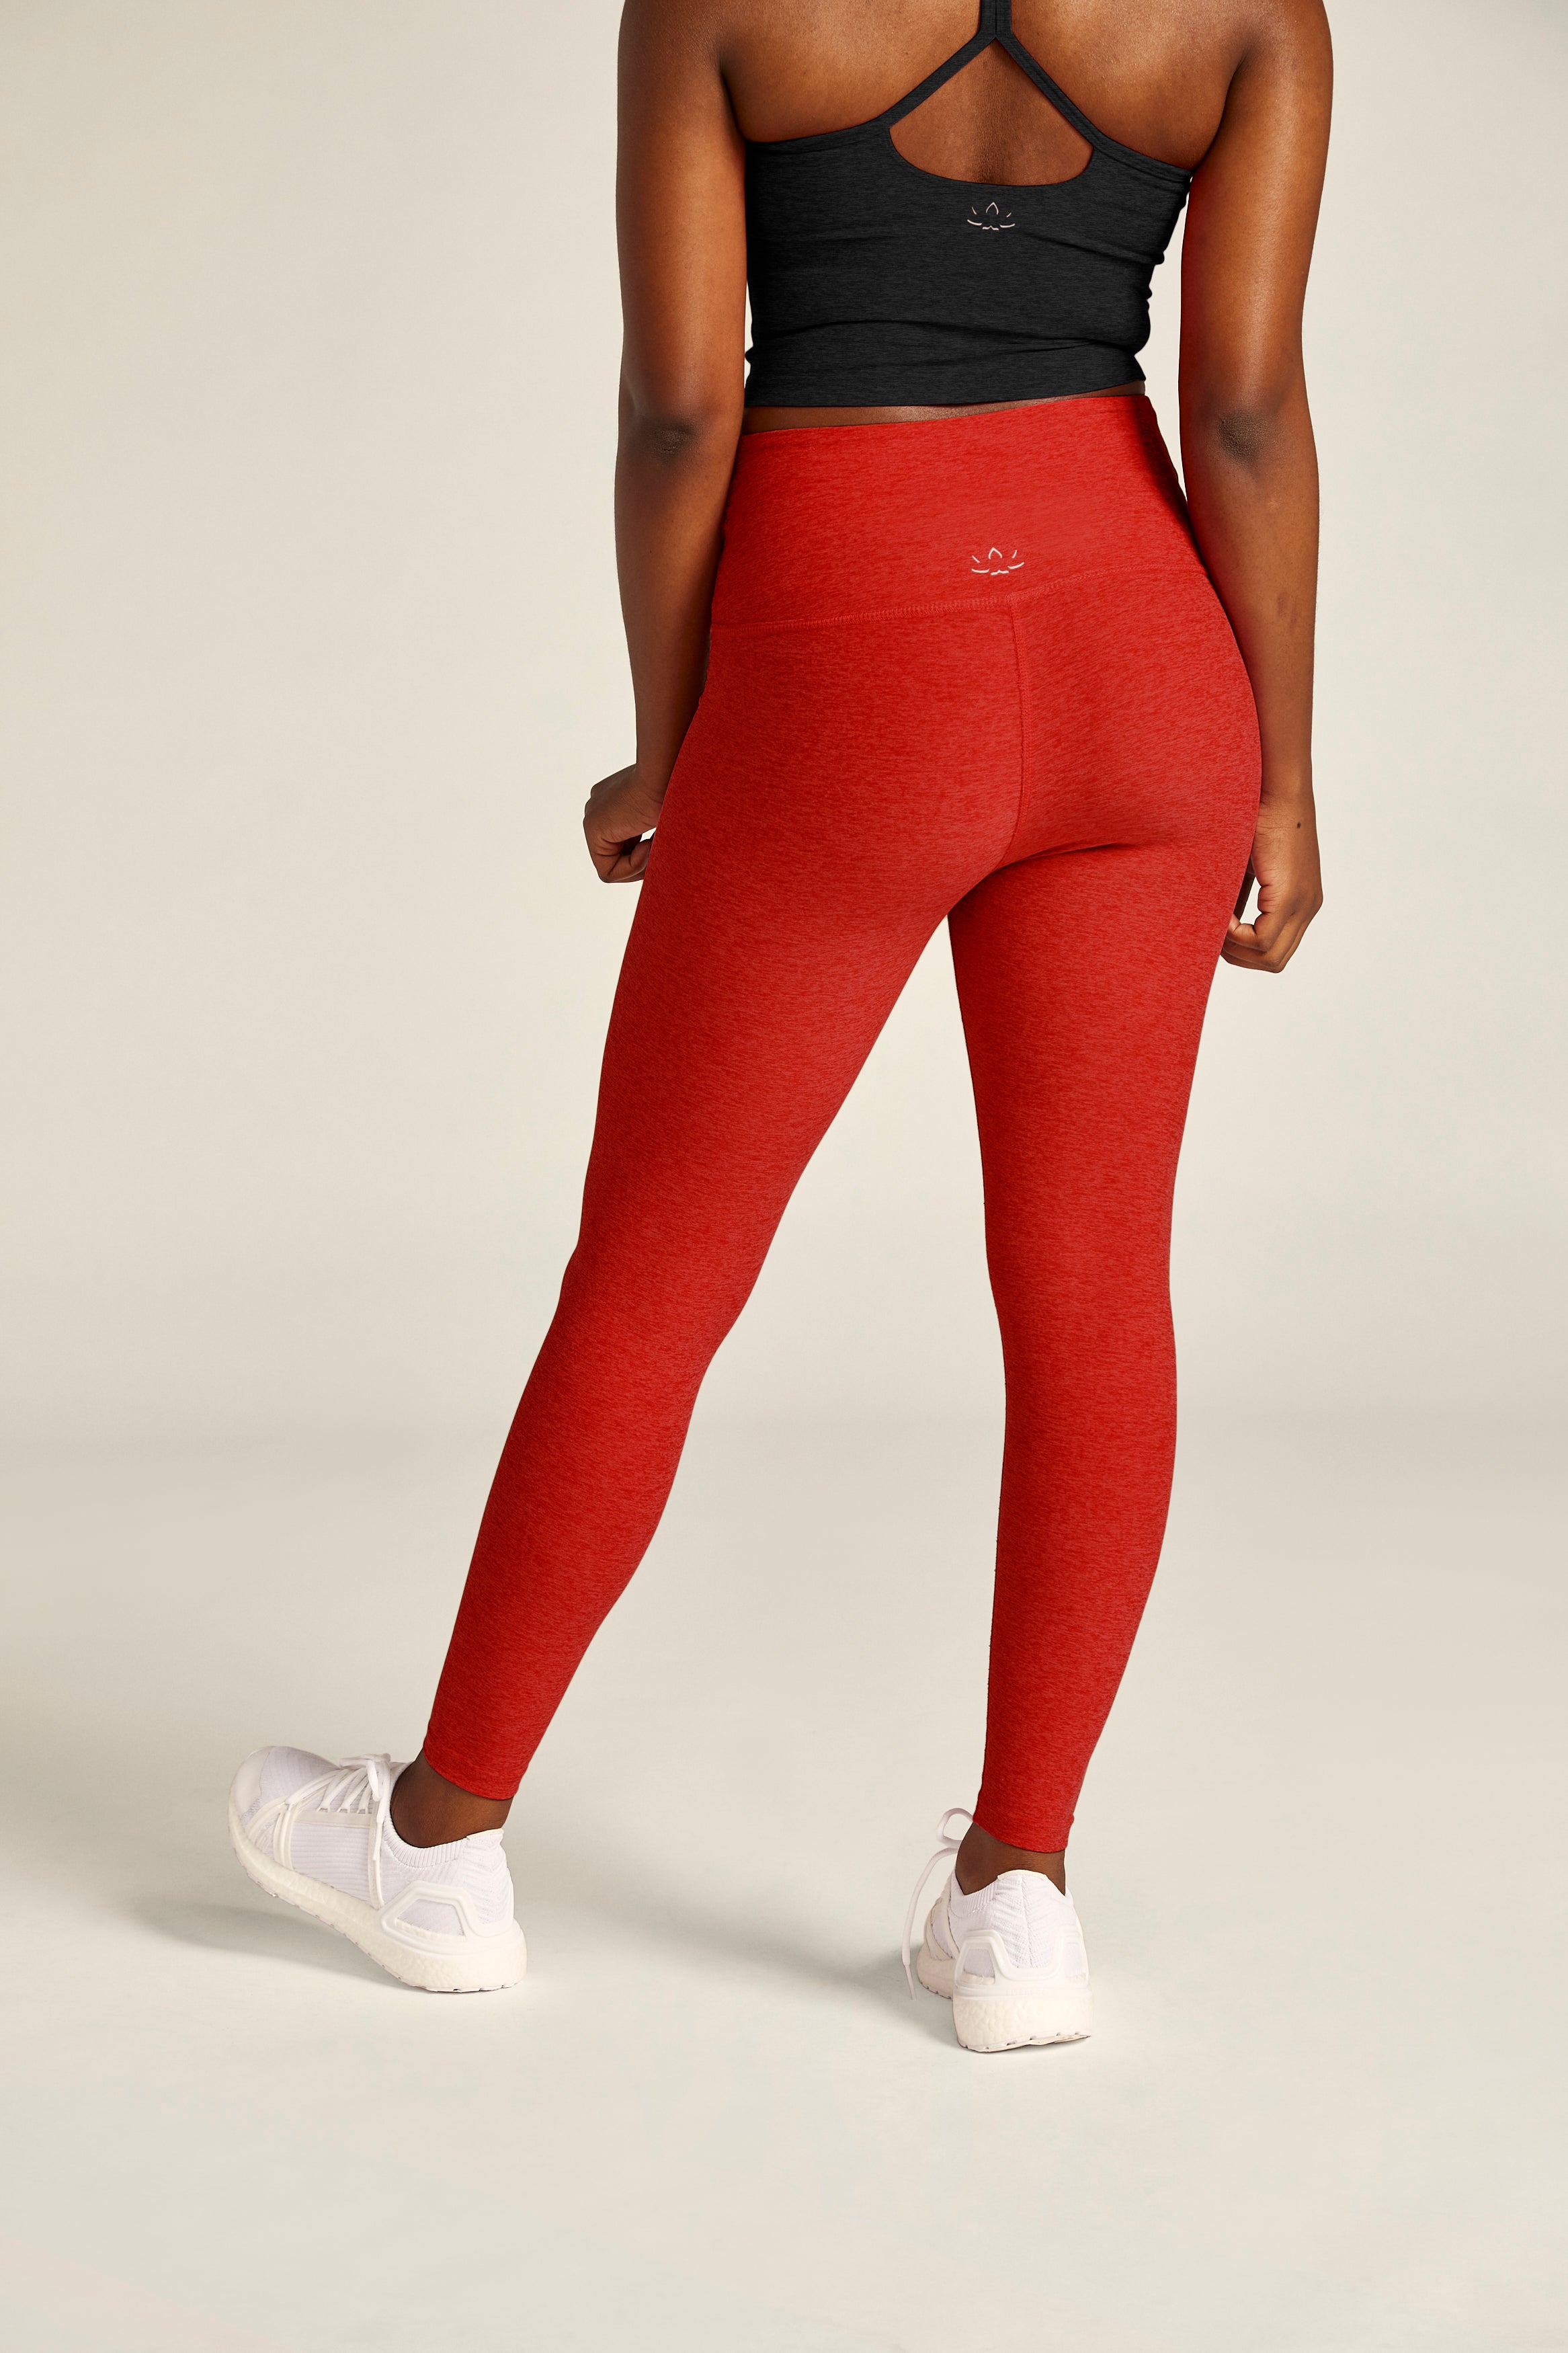 At Your Leisure High-Waisted Midi Legging